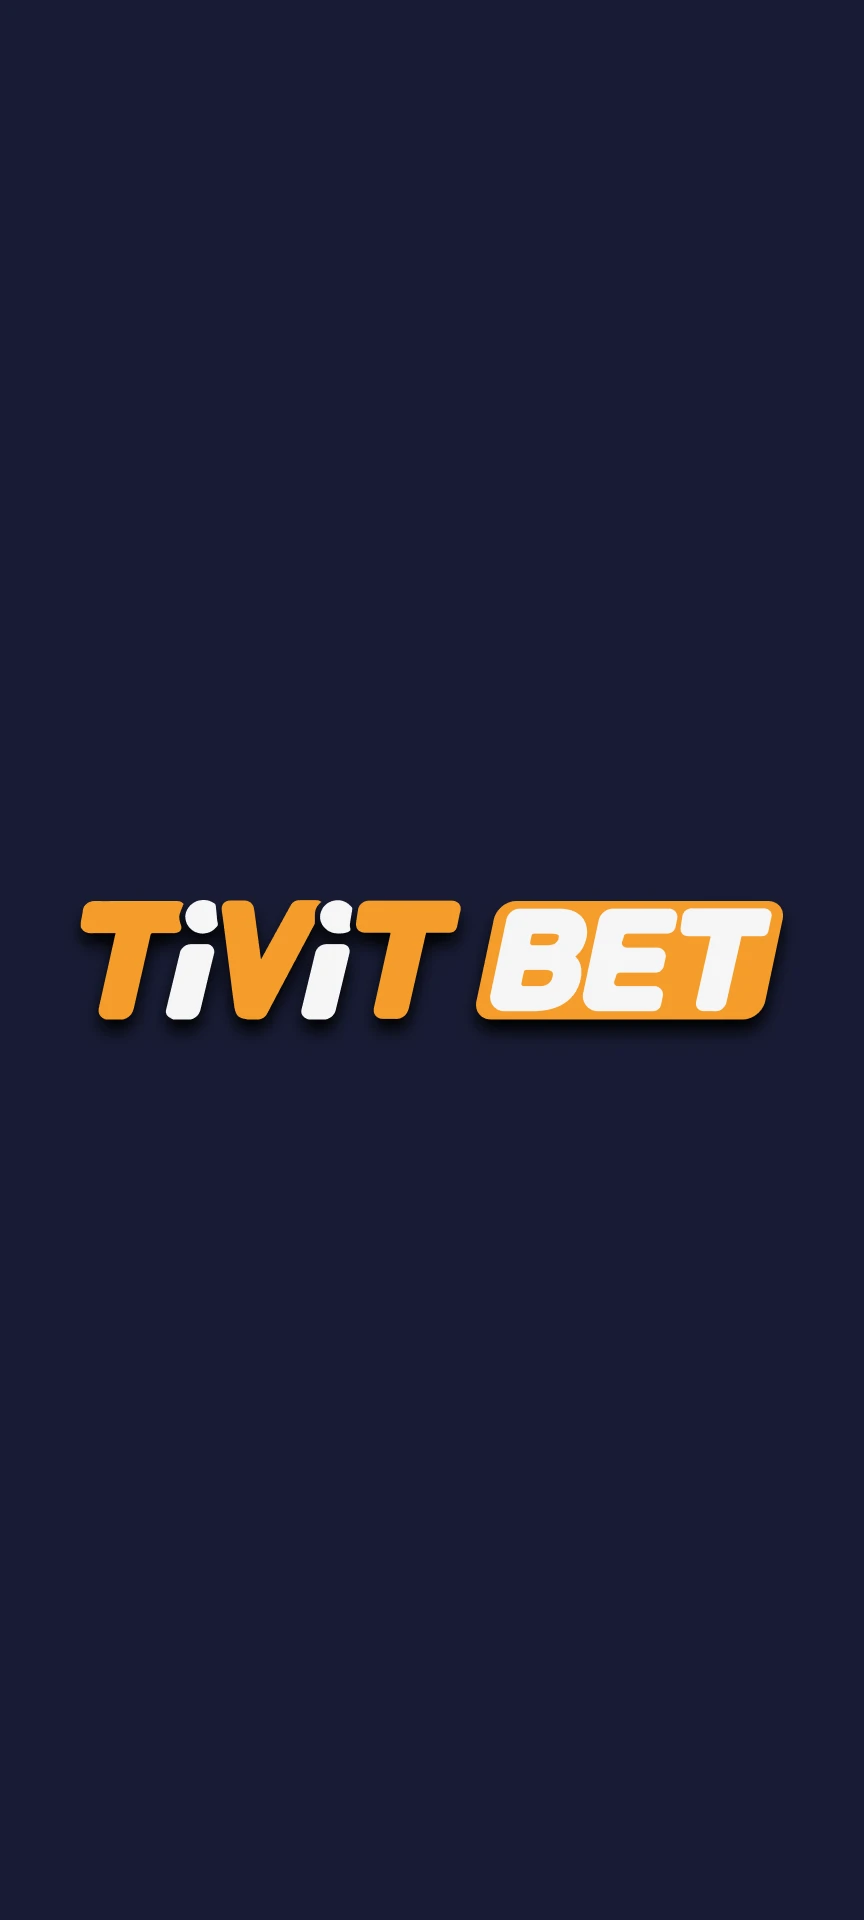 Install and launch the Tivitbet app for Android.